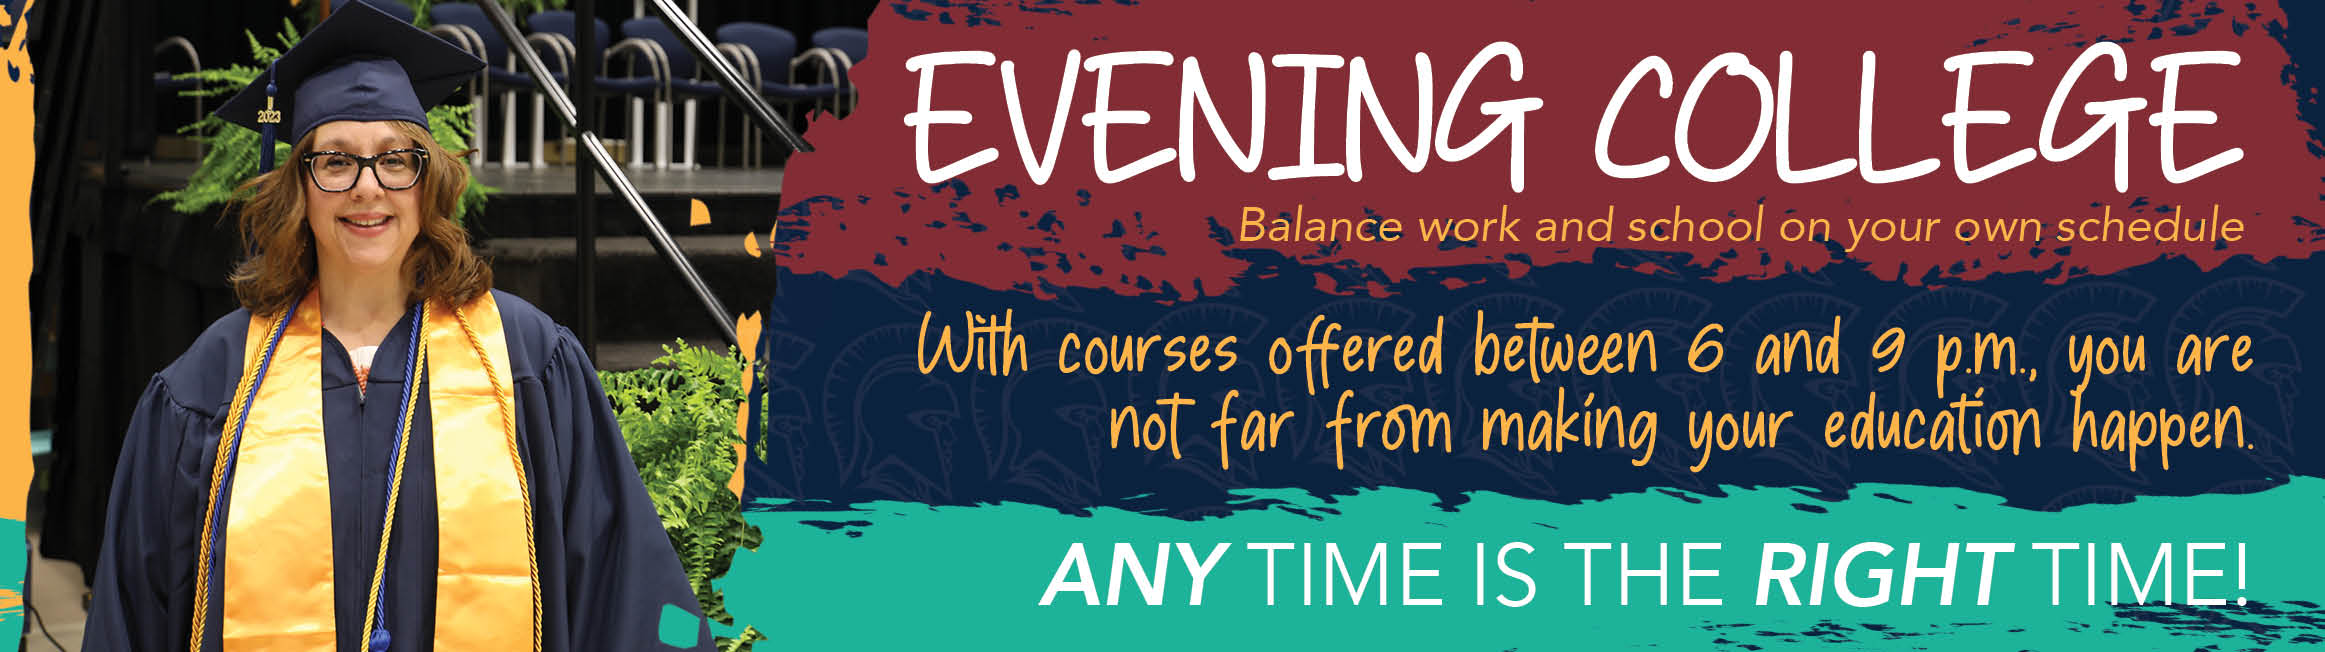 Evening College - Any time is the right time!